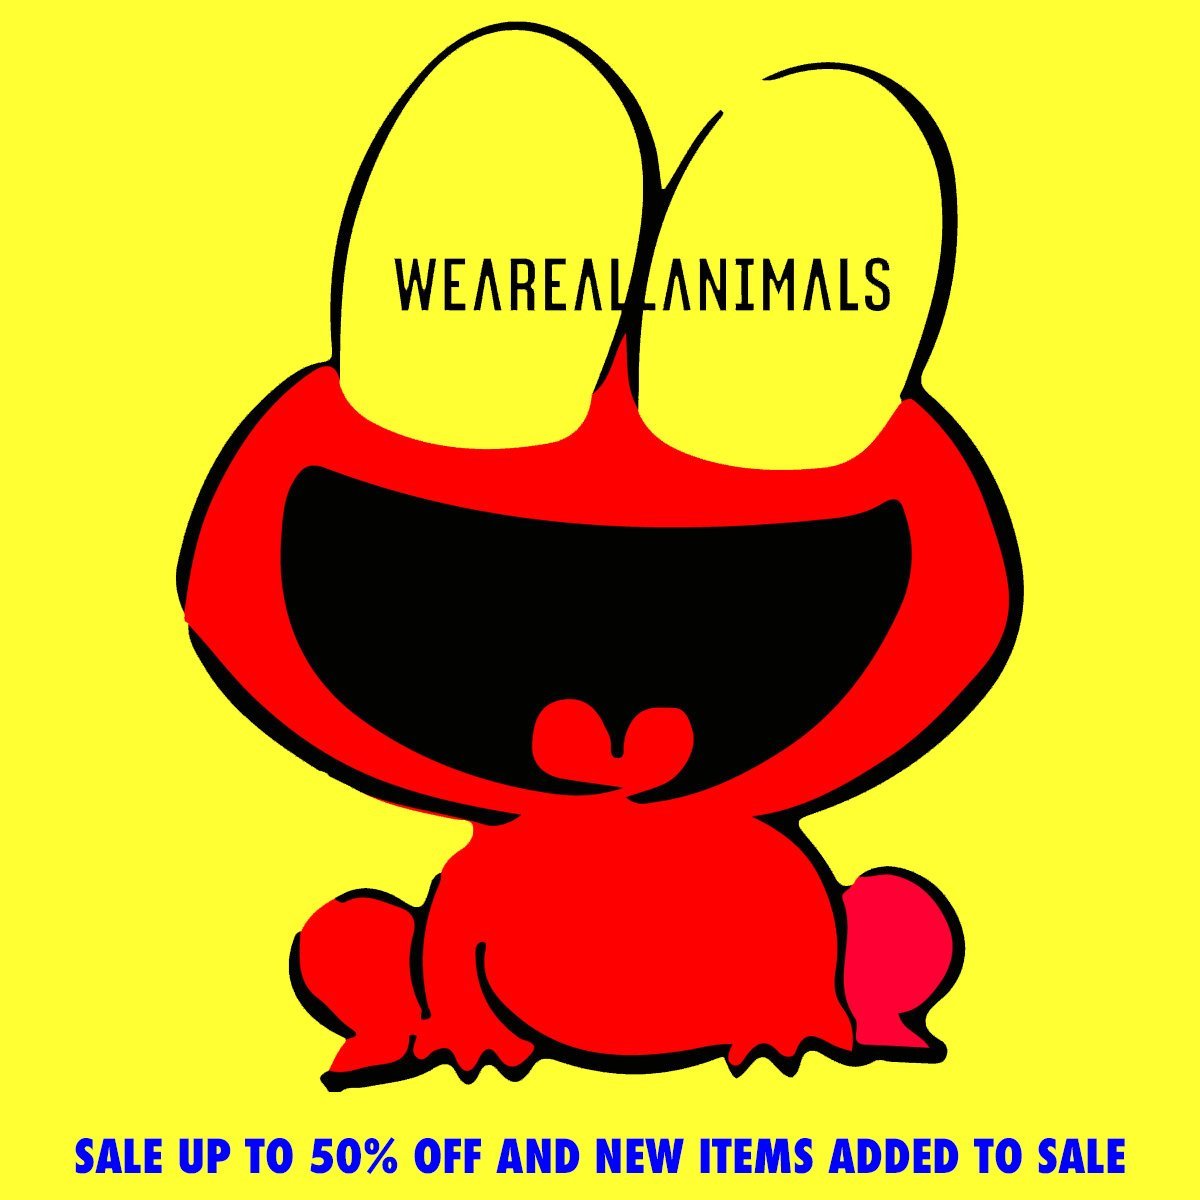 SALE UP TO 50% OFF AND NEW ITEMS ADDED TO SALE！！ - WEAREALLANIMALS